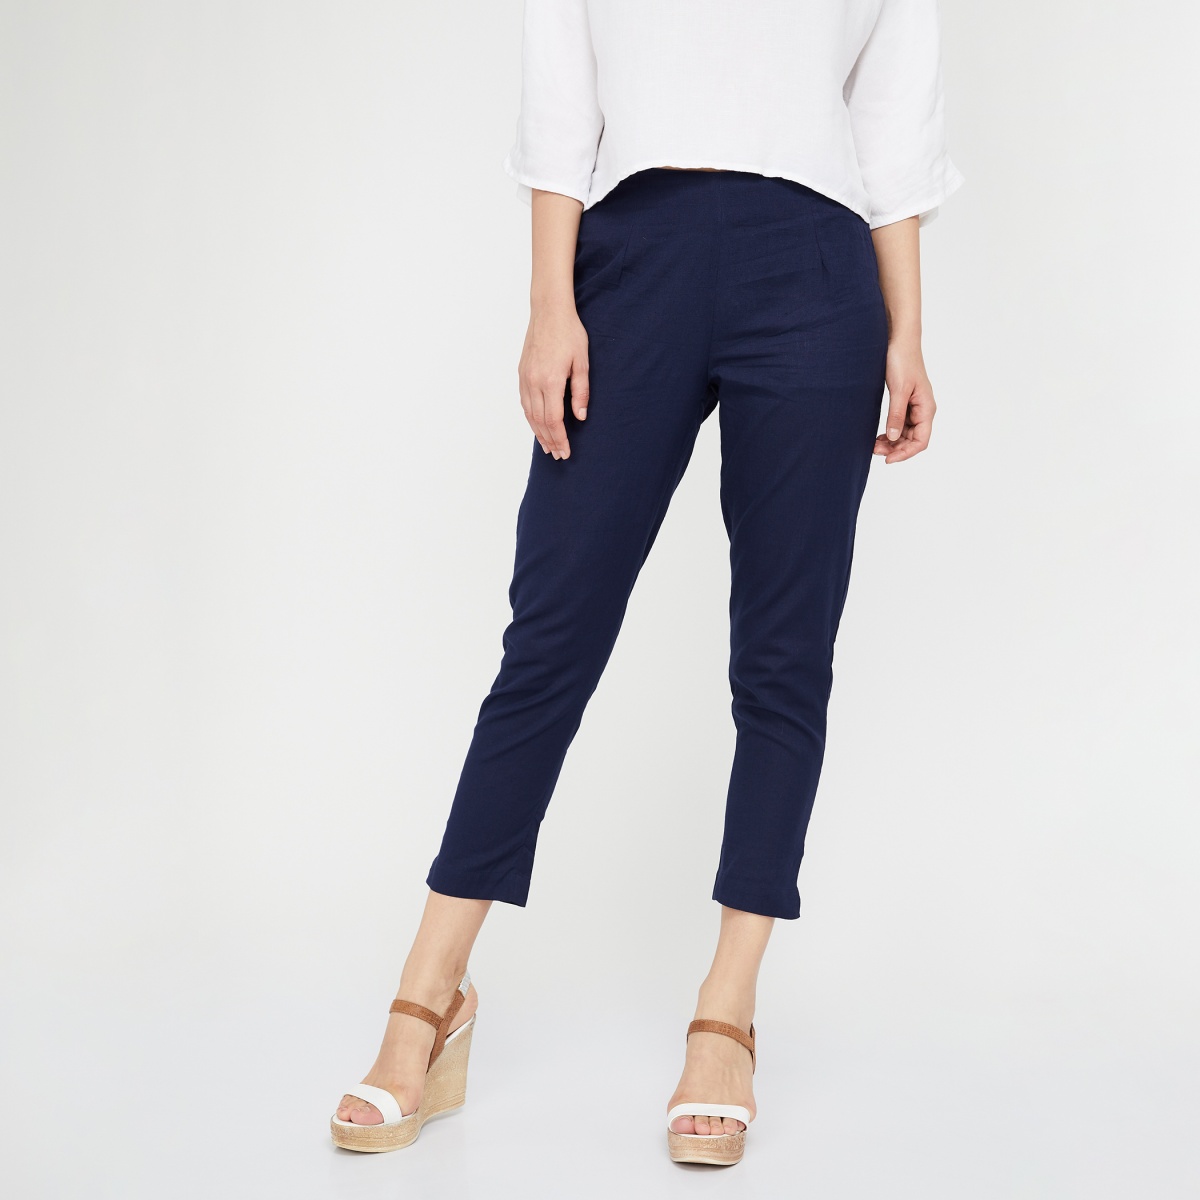 Ankle Pants and Spring Fashion for Women Over 60 | Sixty and Me